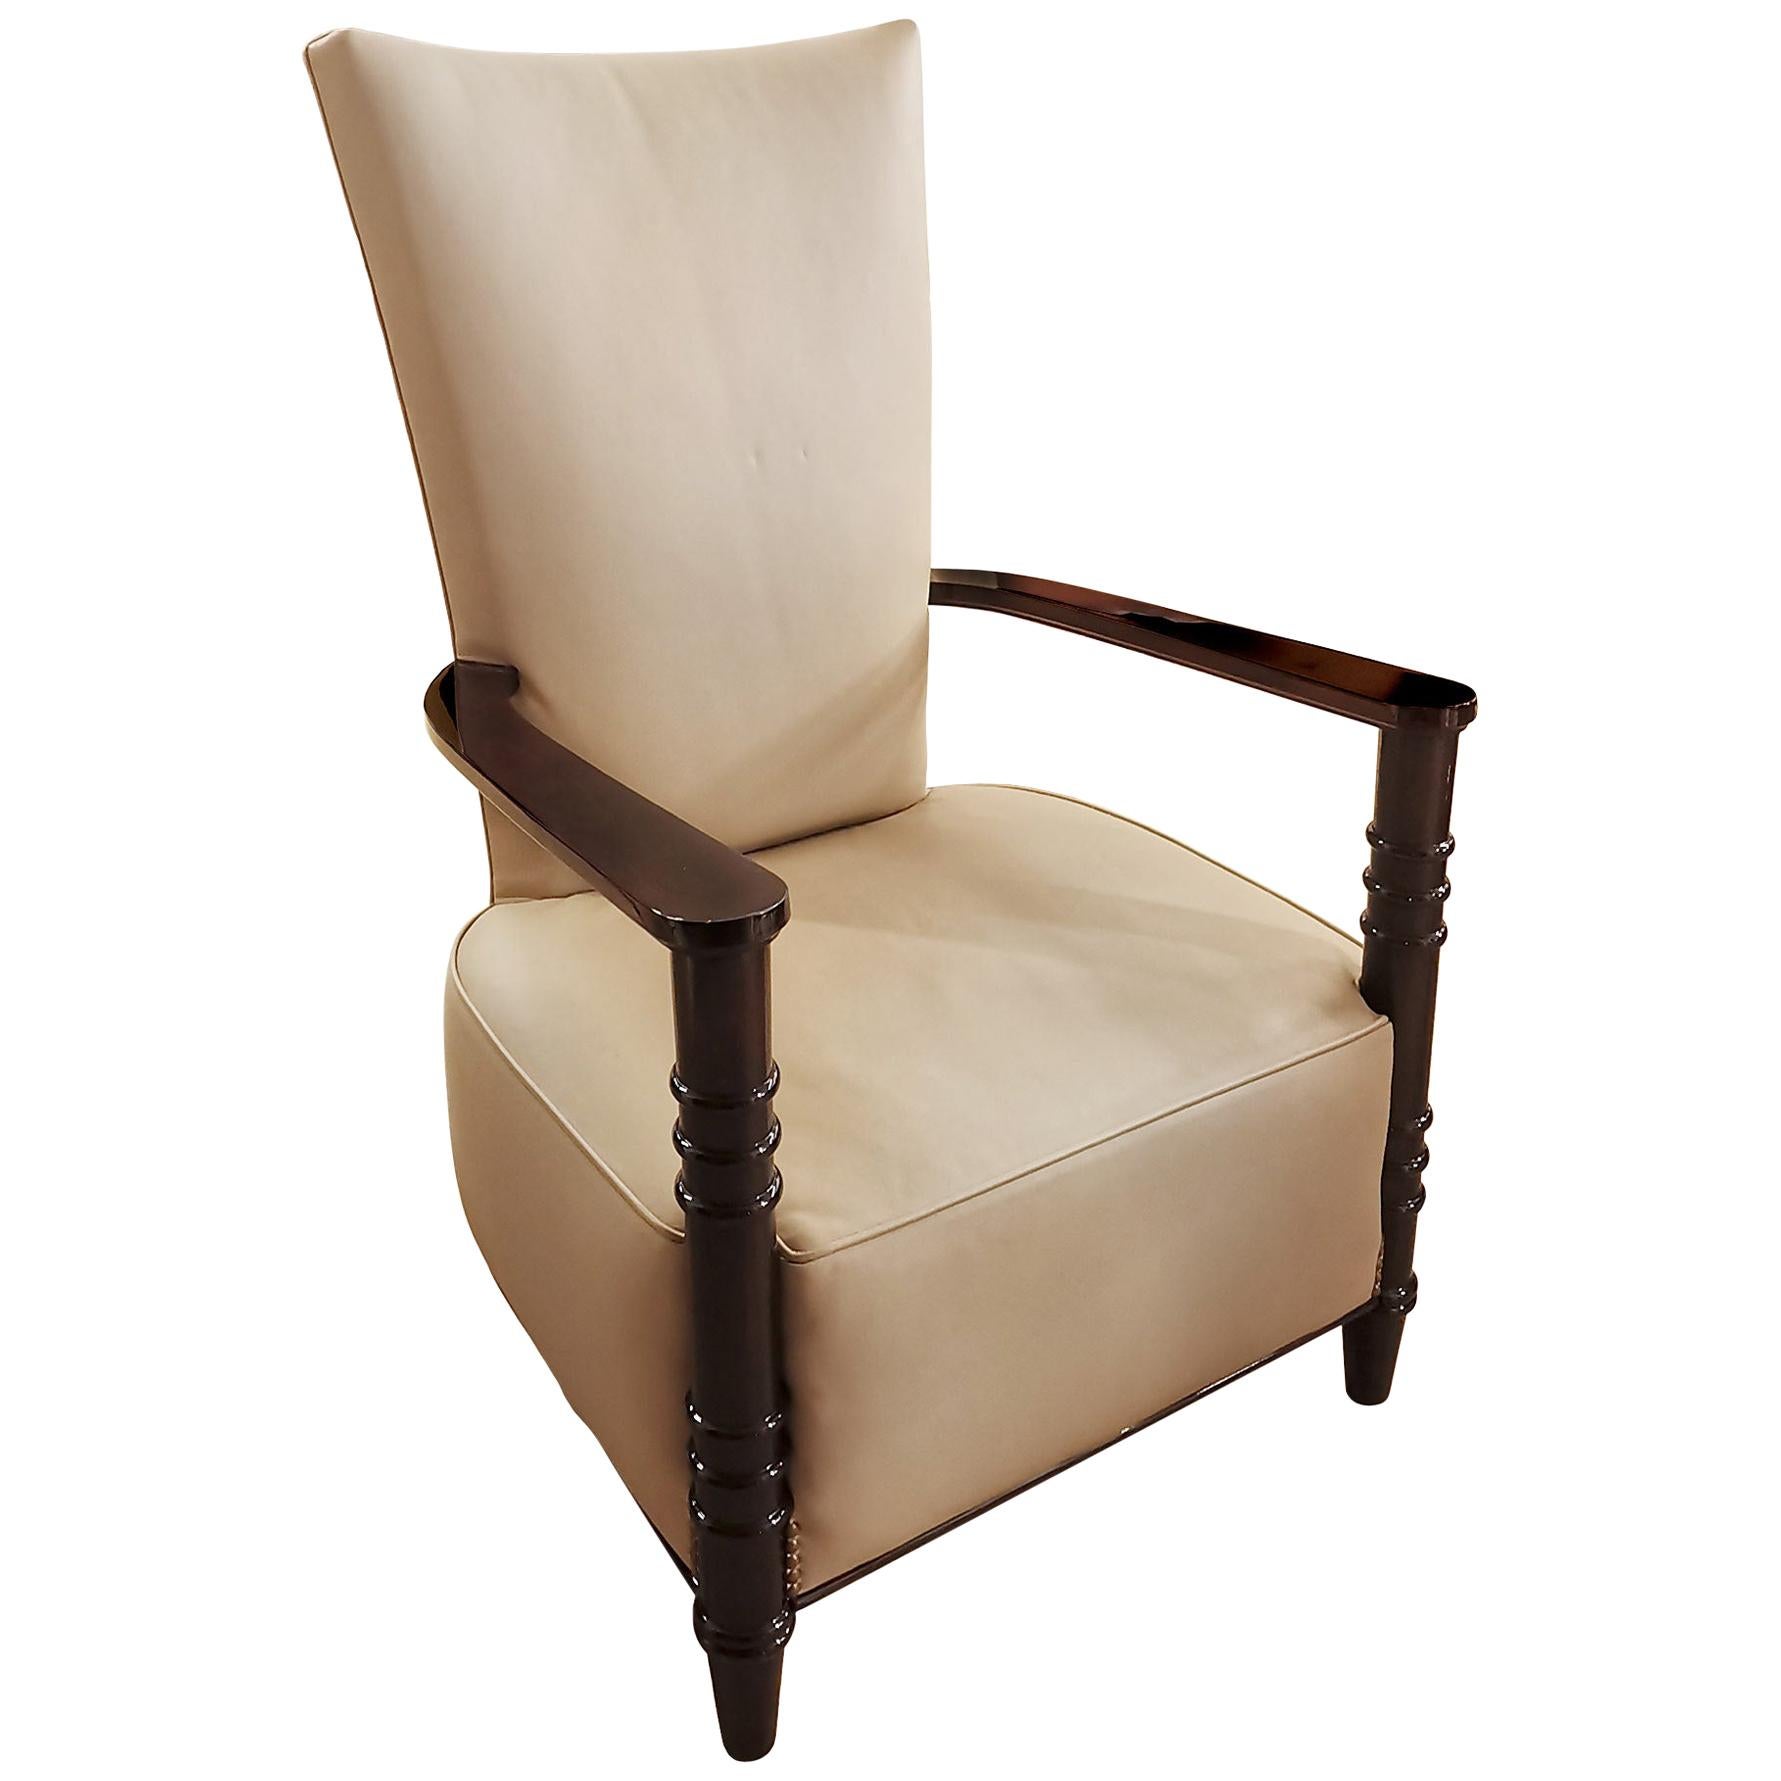 1940´s Art Deco Style Armchair With High Back, Leather, Wood - France For Sale